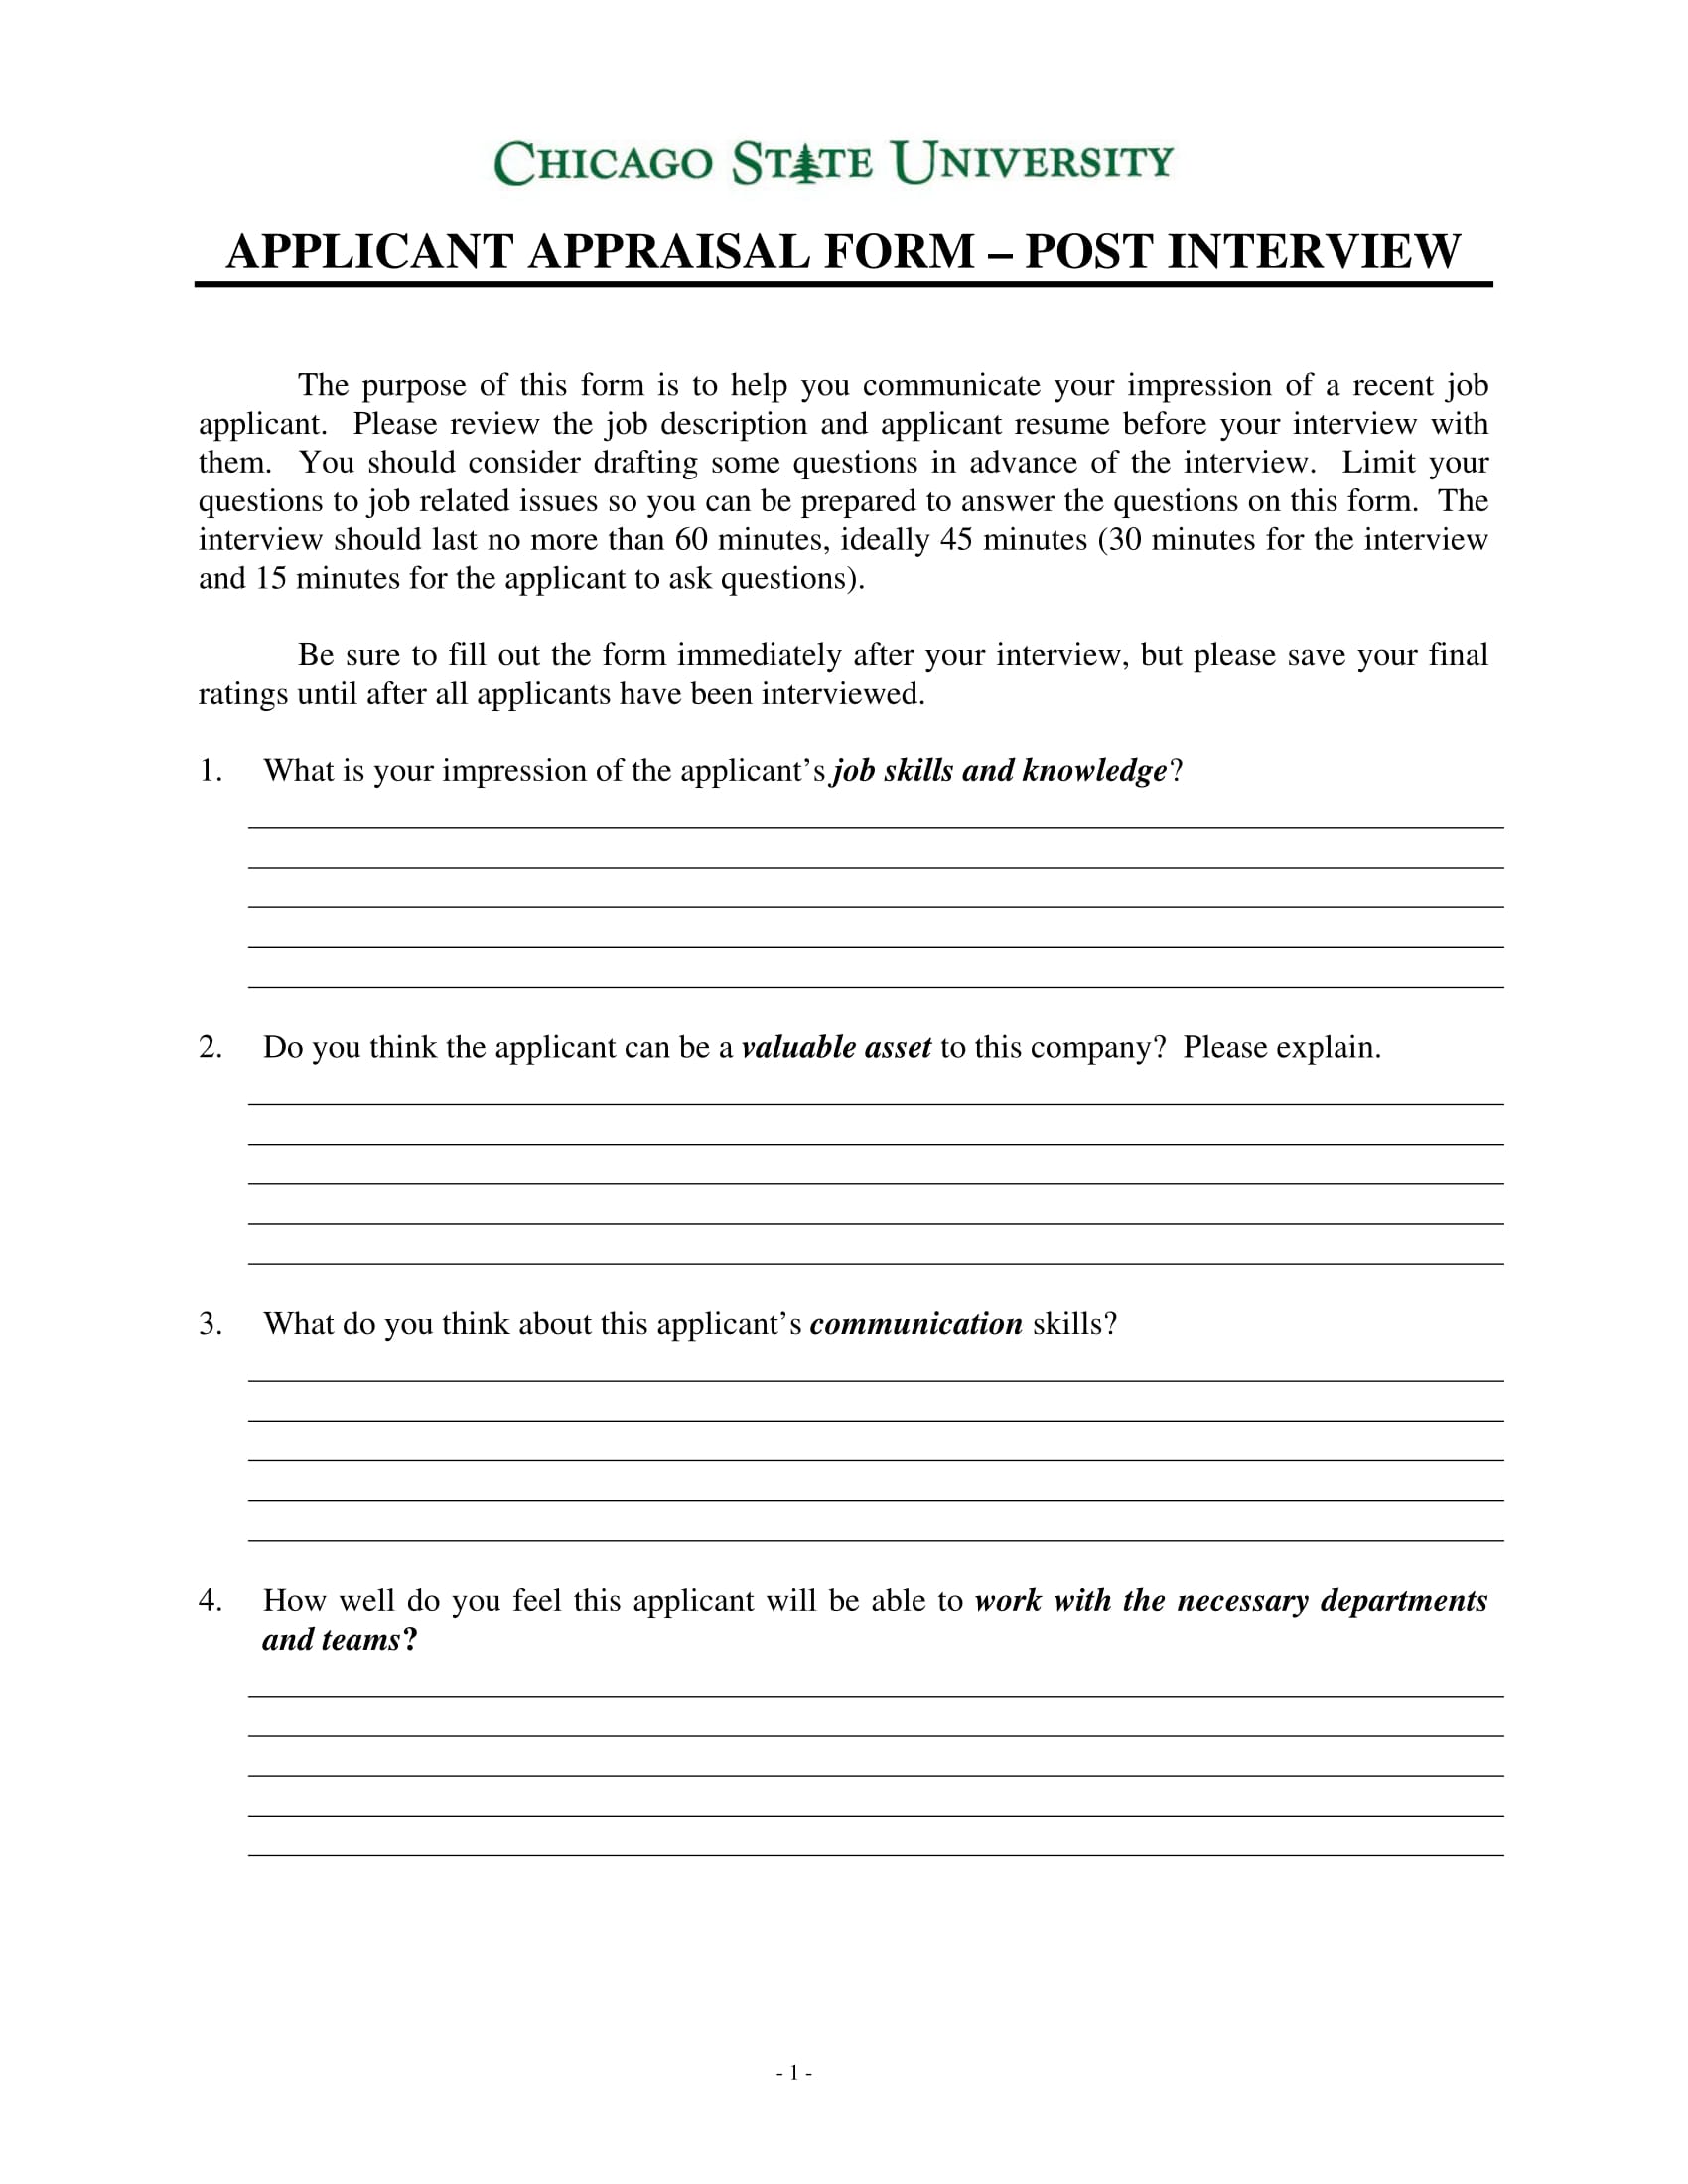 post interview applicant appraisal form 11